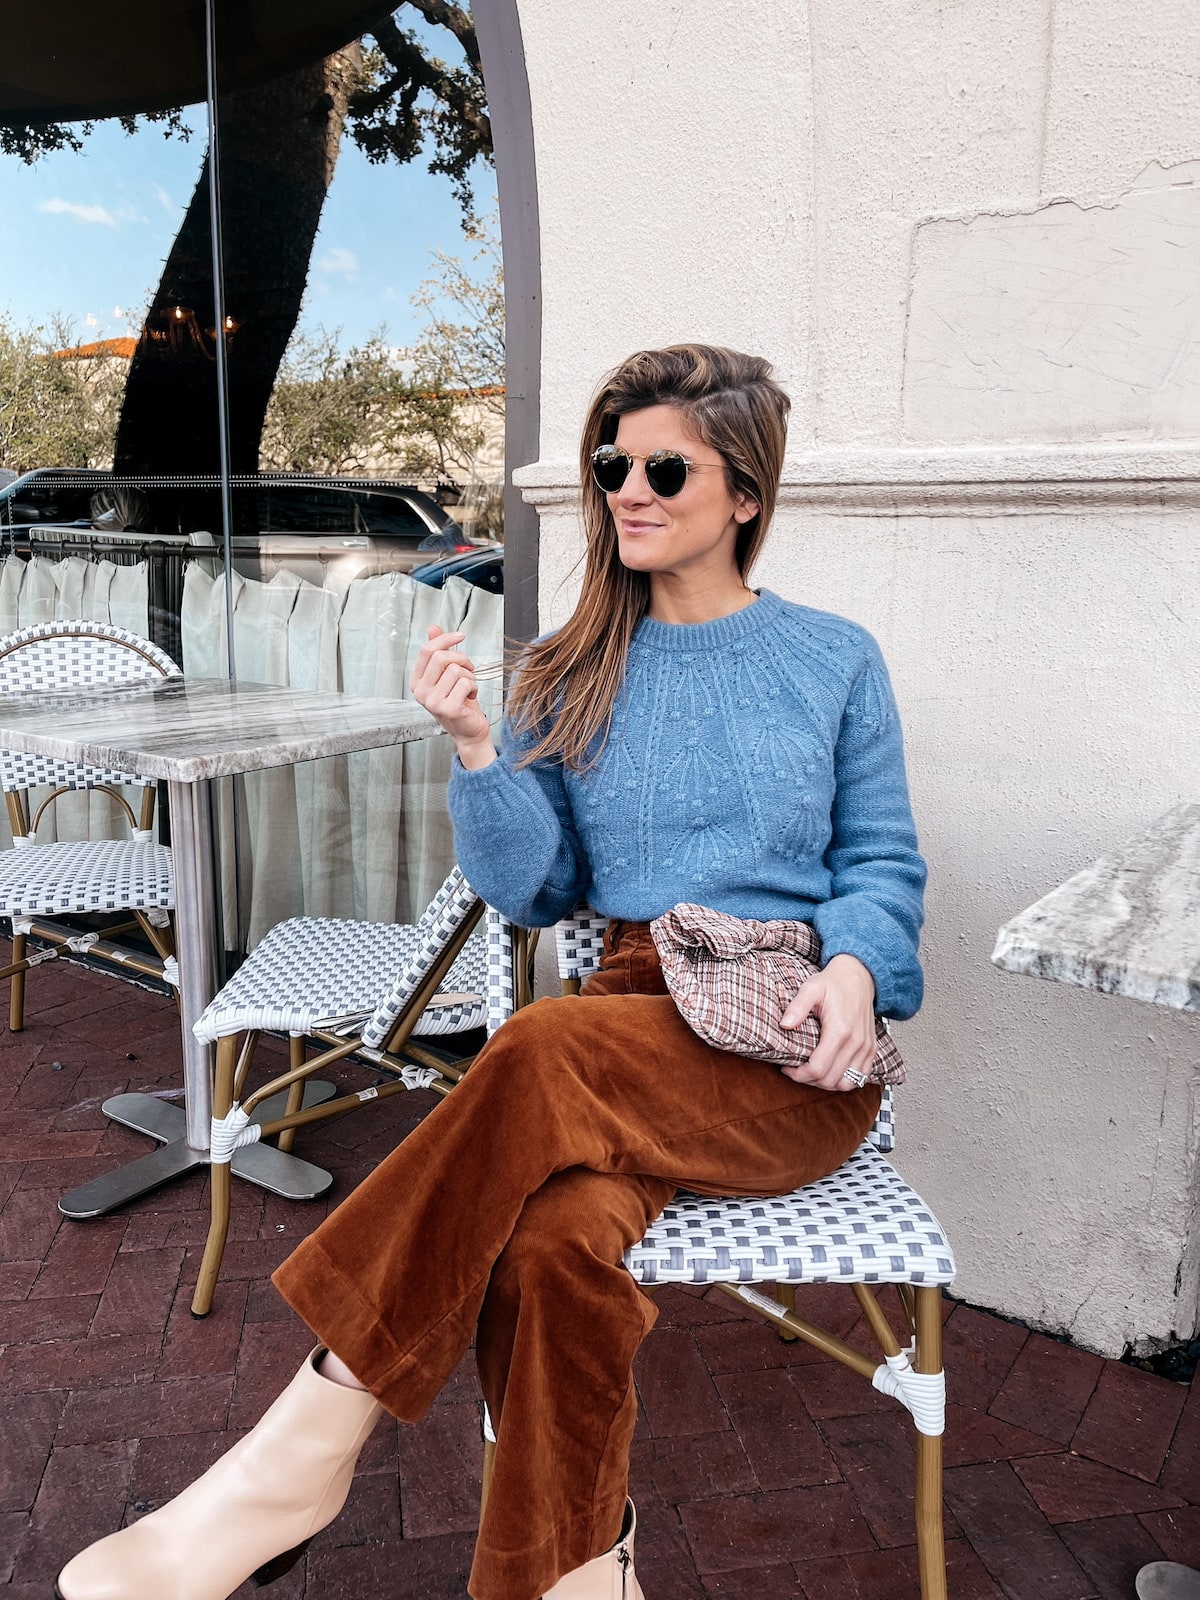 Brighton Butler wearing Boden corduroy pants with blue sweater